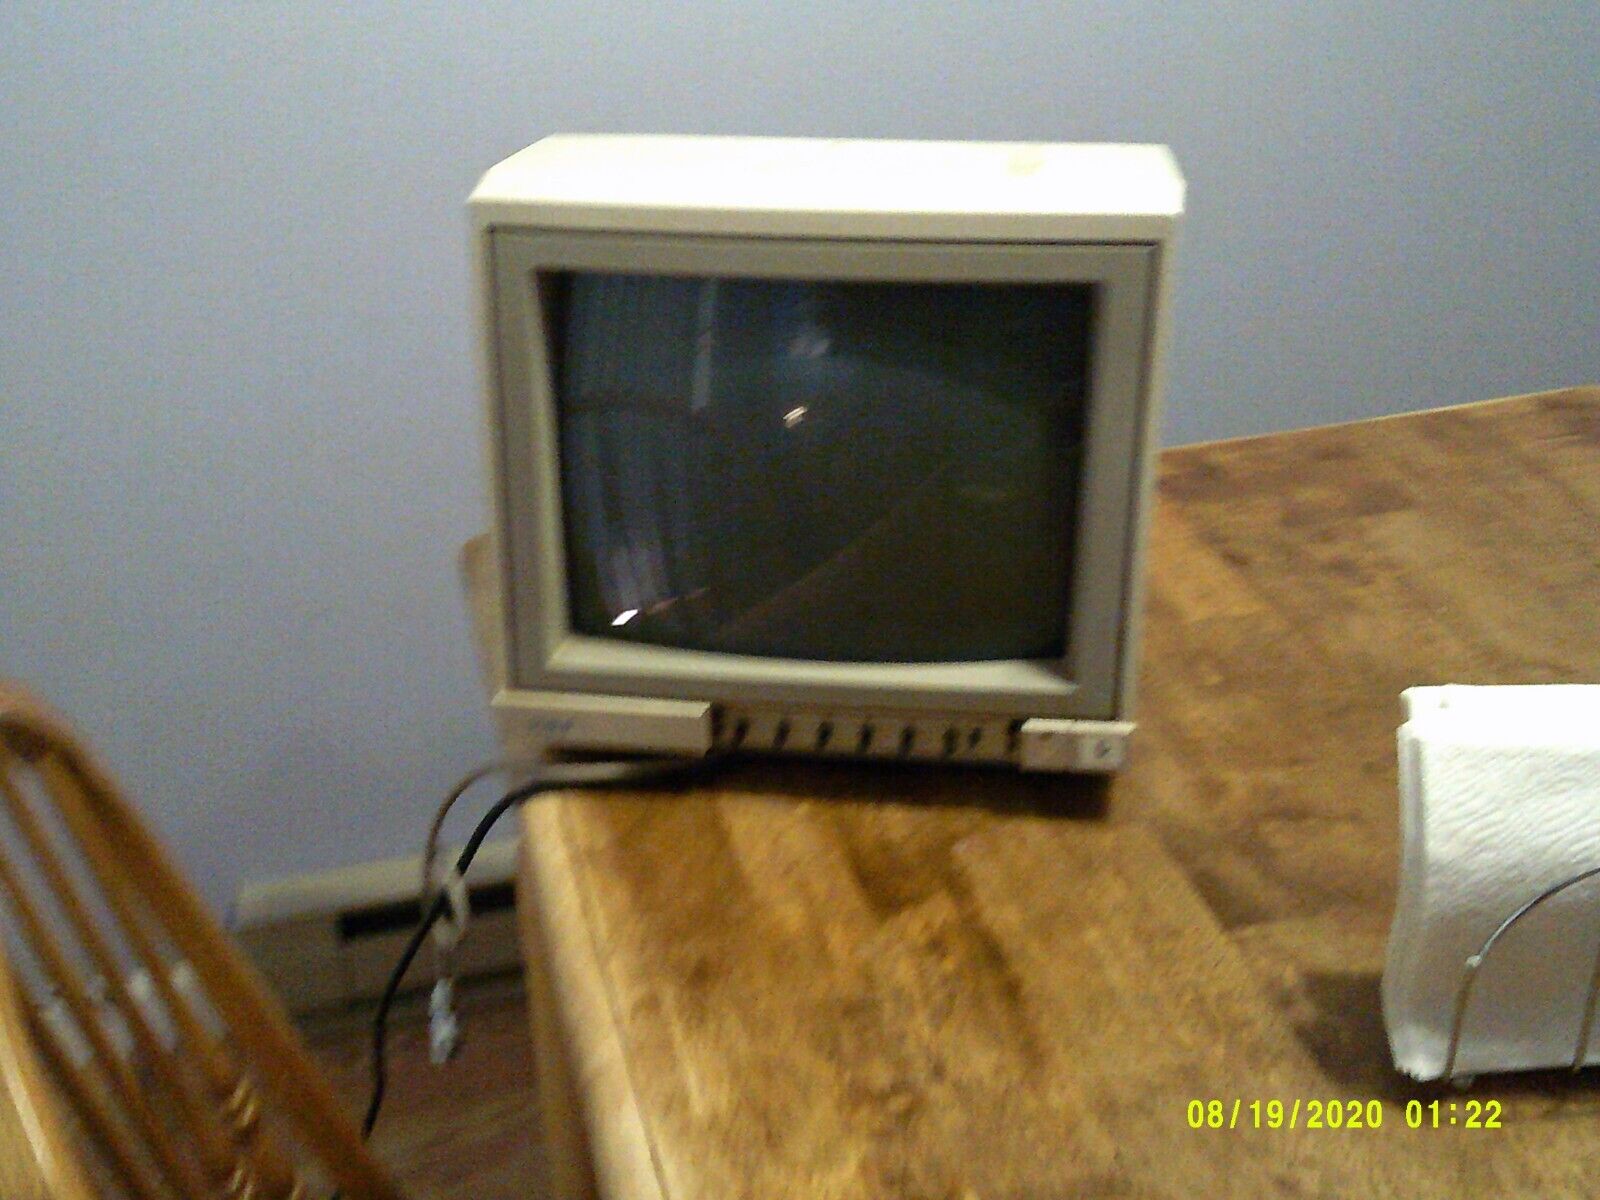 VINTAGE 1084 1988 COMMODORE   MONITOR  Comes on but power button is flaky